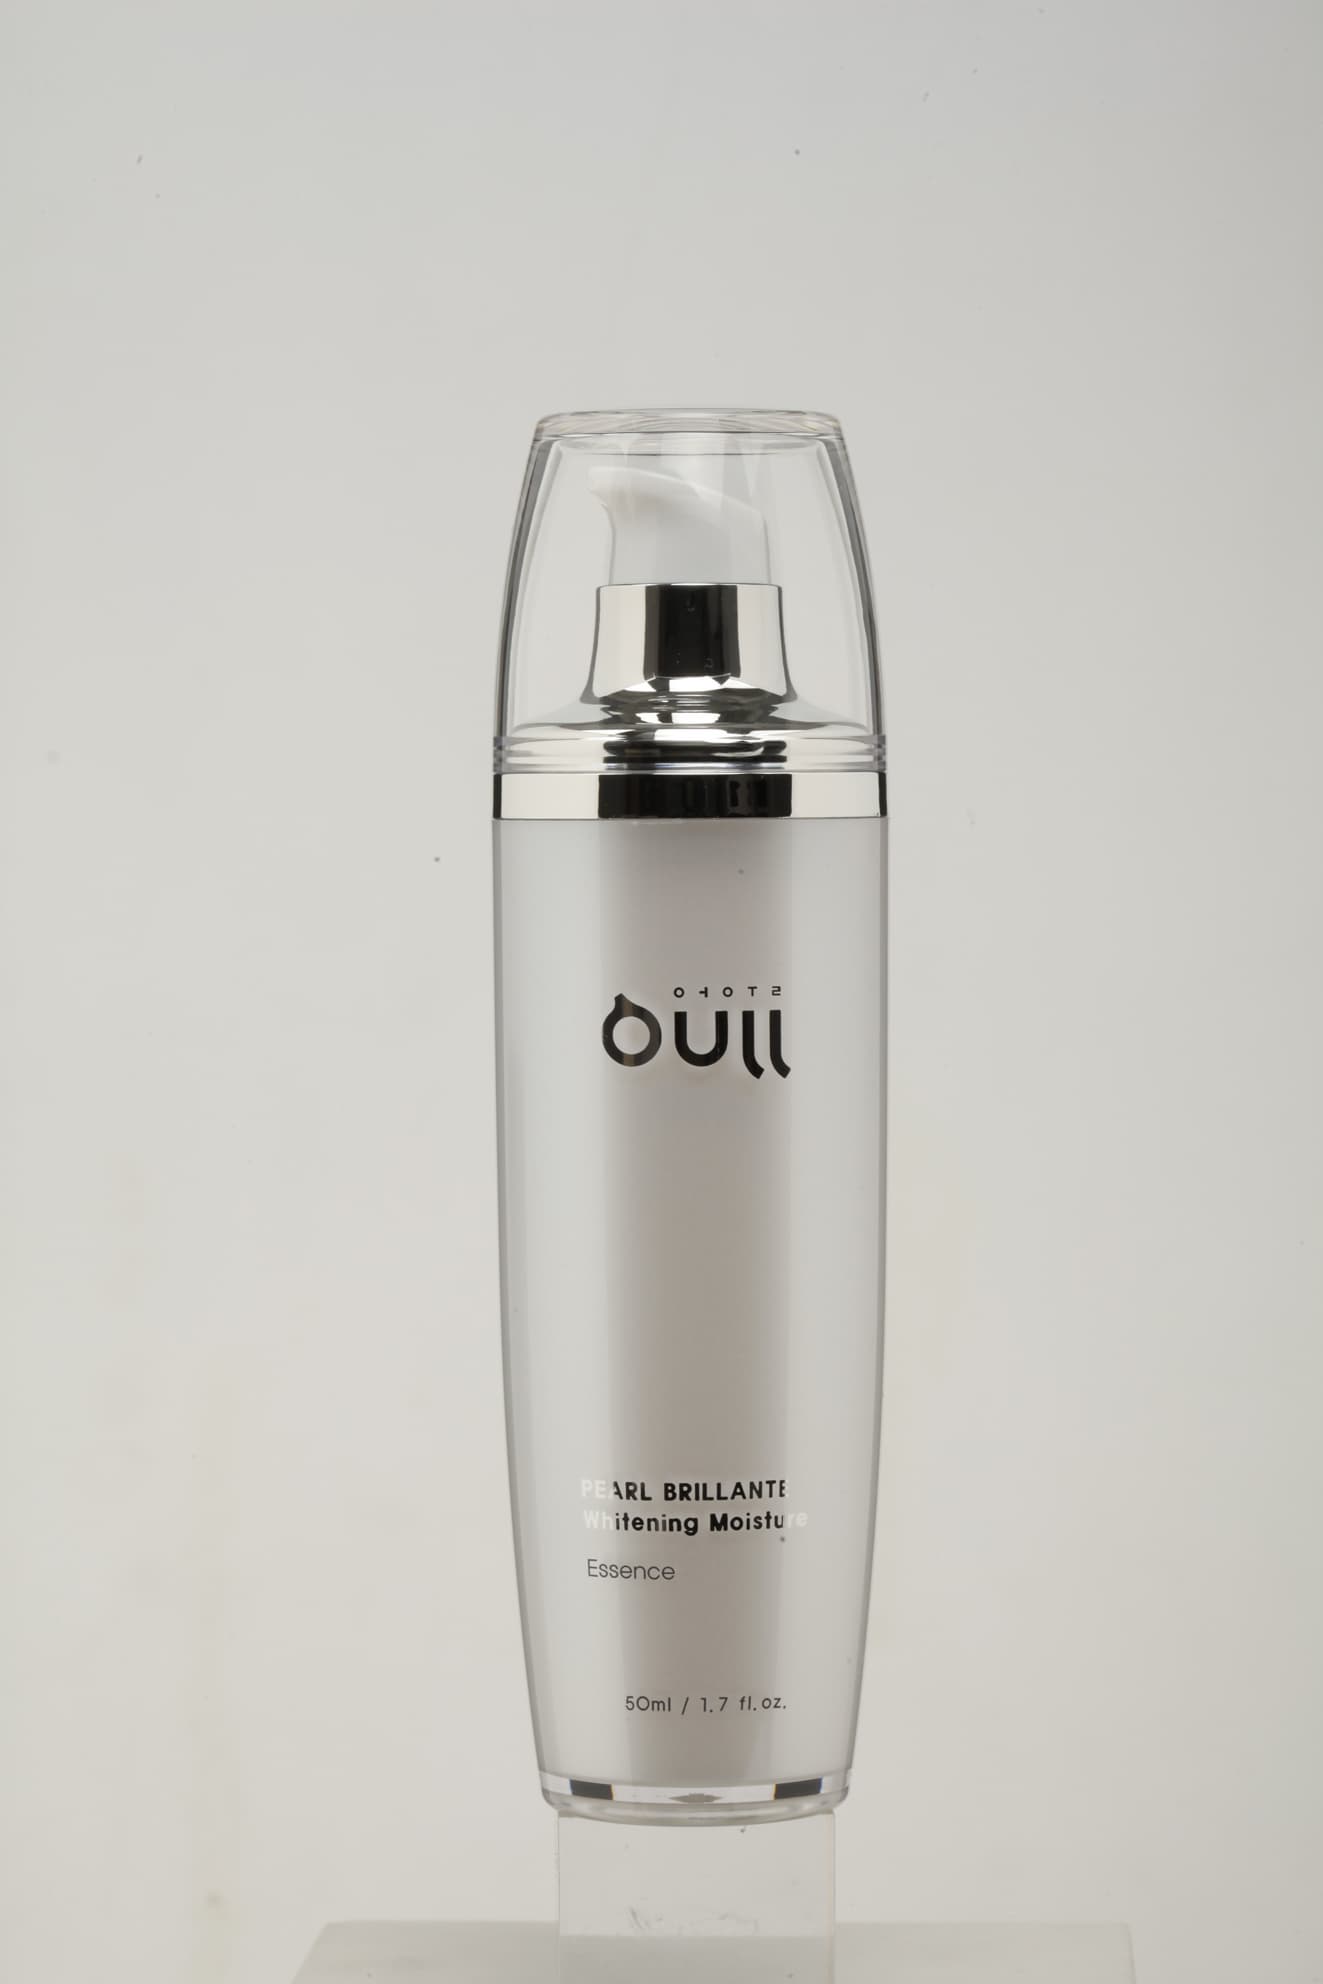 Oull Pearl Brillante Whitening Essence